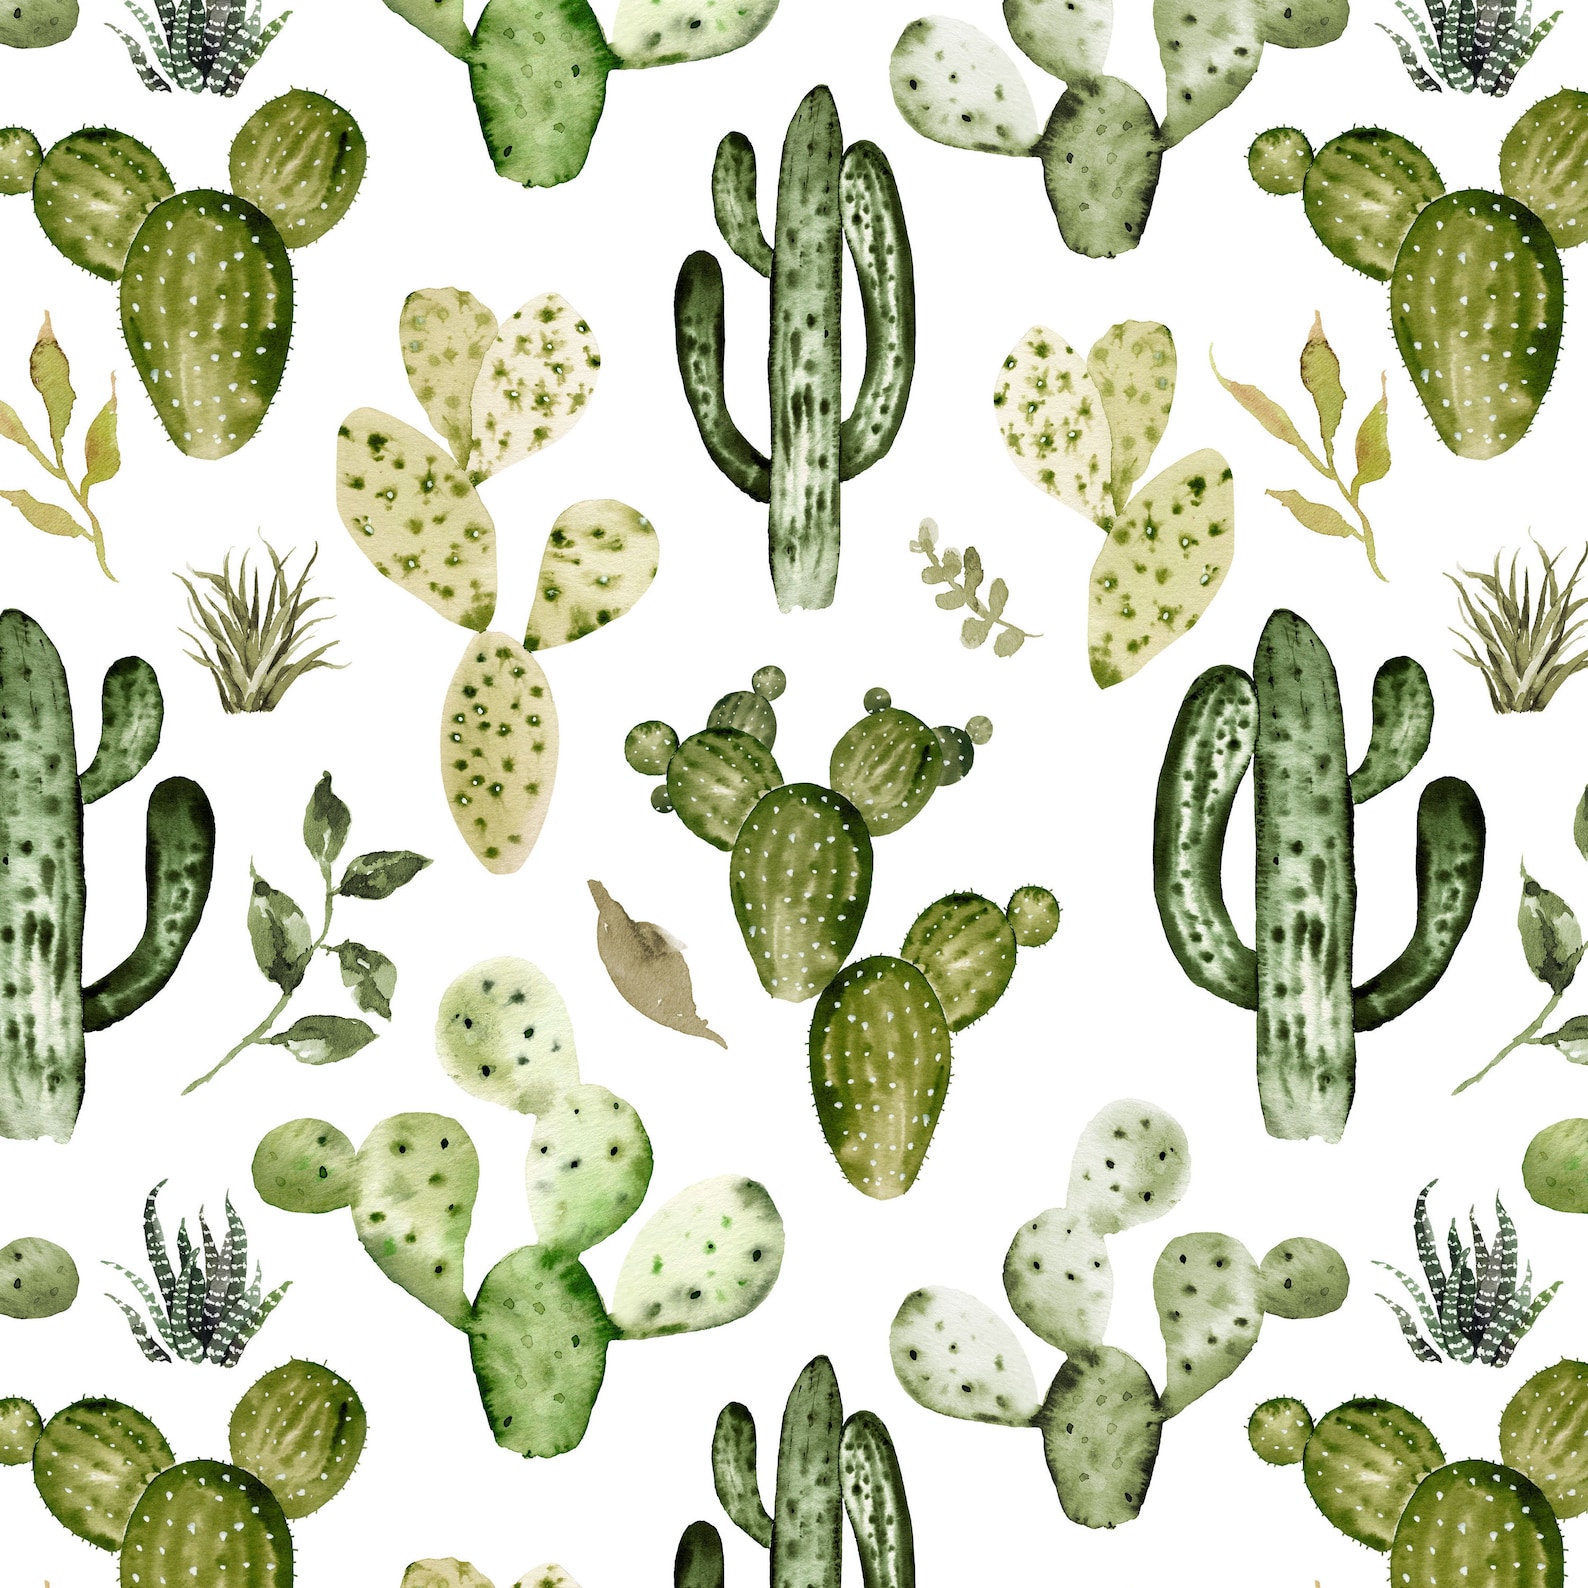 Wild West Cactus Fabric by the Yard. Watercolor Cacti | Etsy